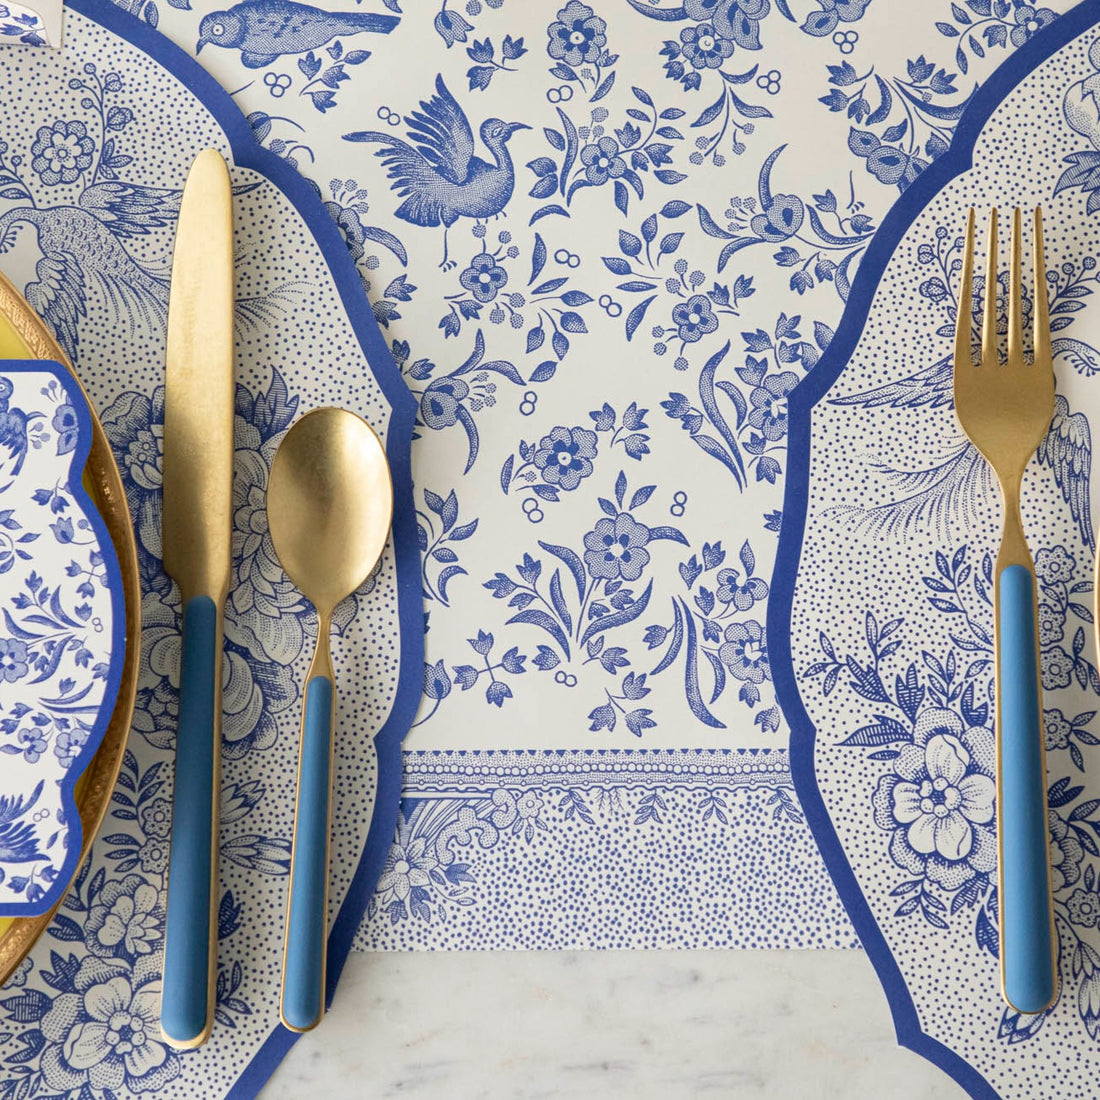 Close-up of the Blue Regal Peacock Runner under an elegant table setting.